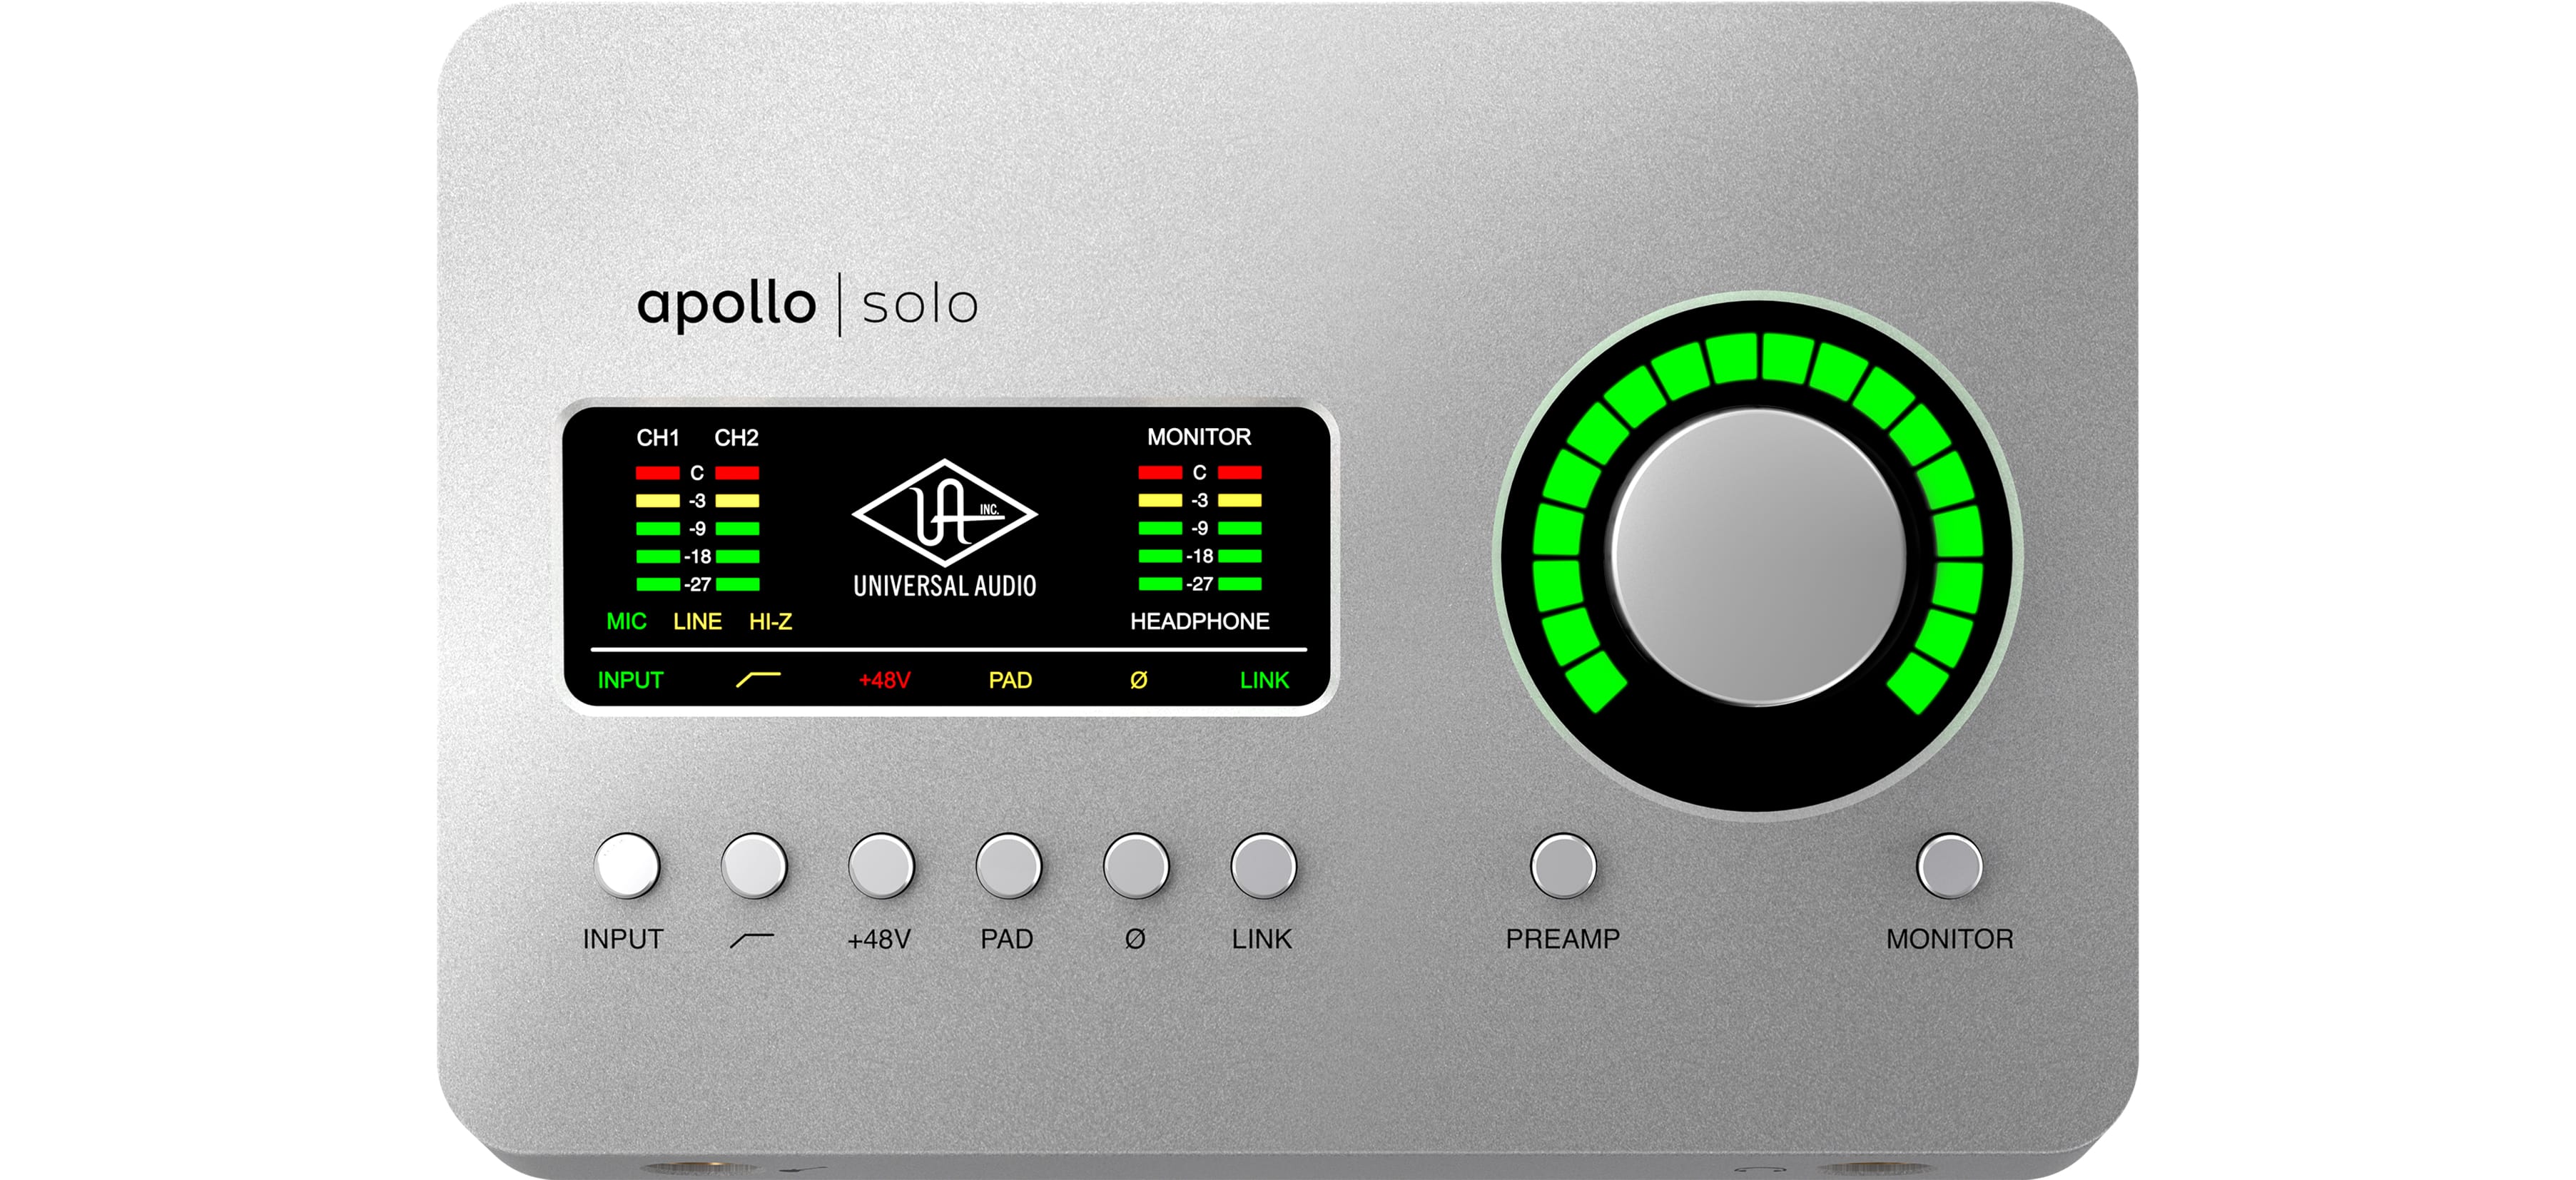 Universal Audio Introduces Apollo Solo For Windows and Mac